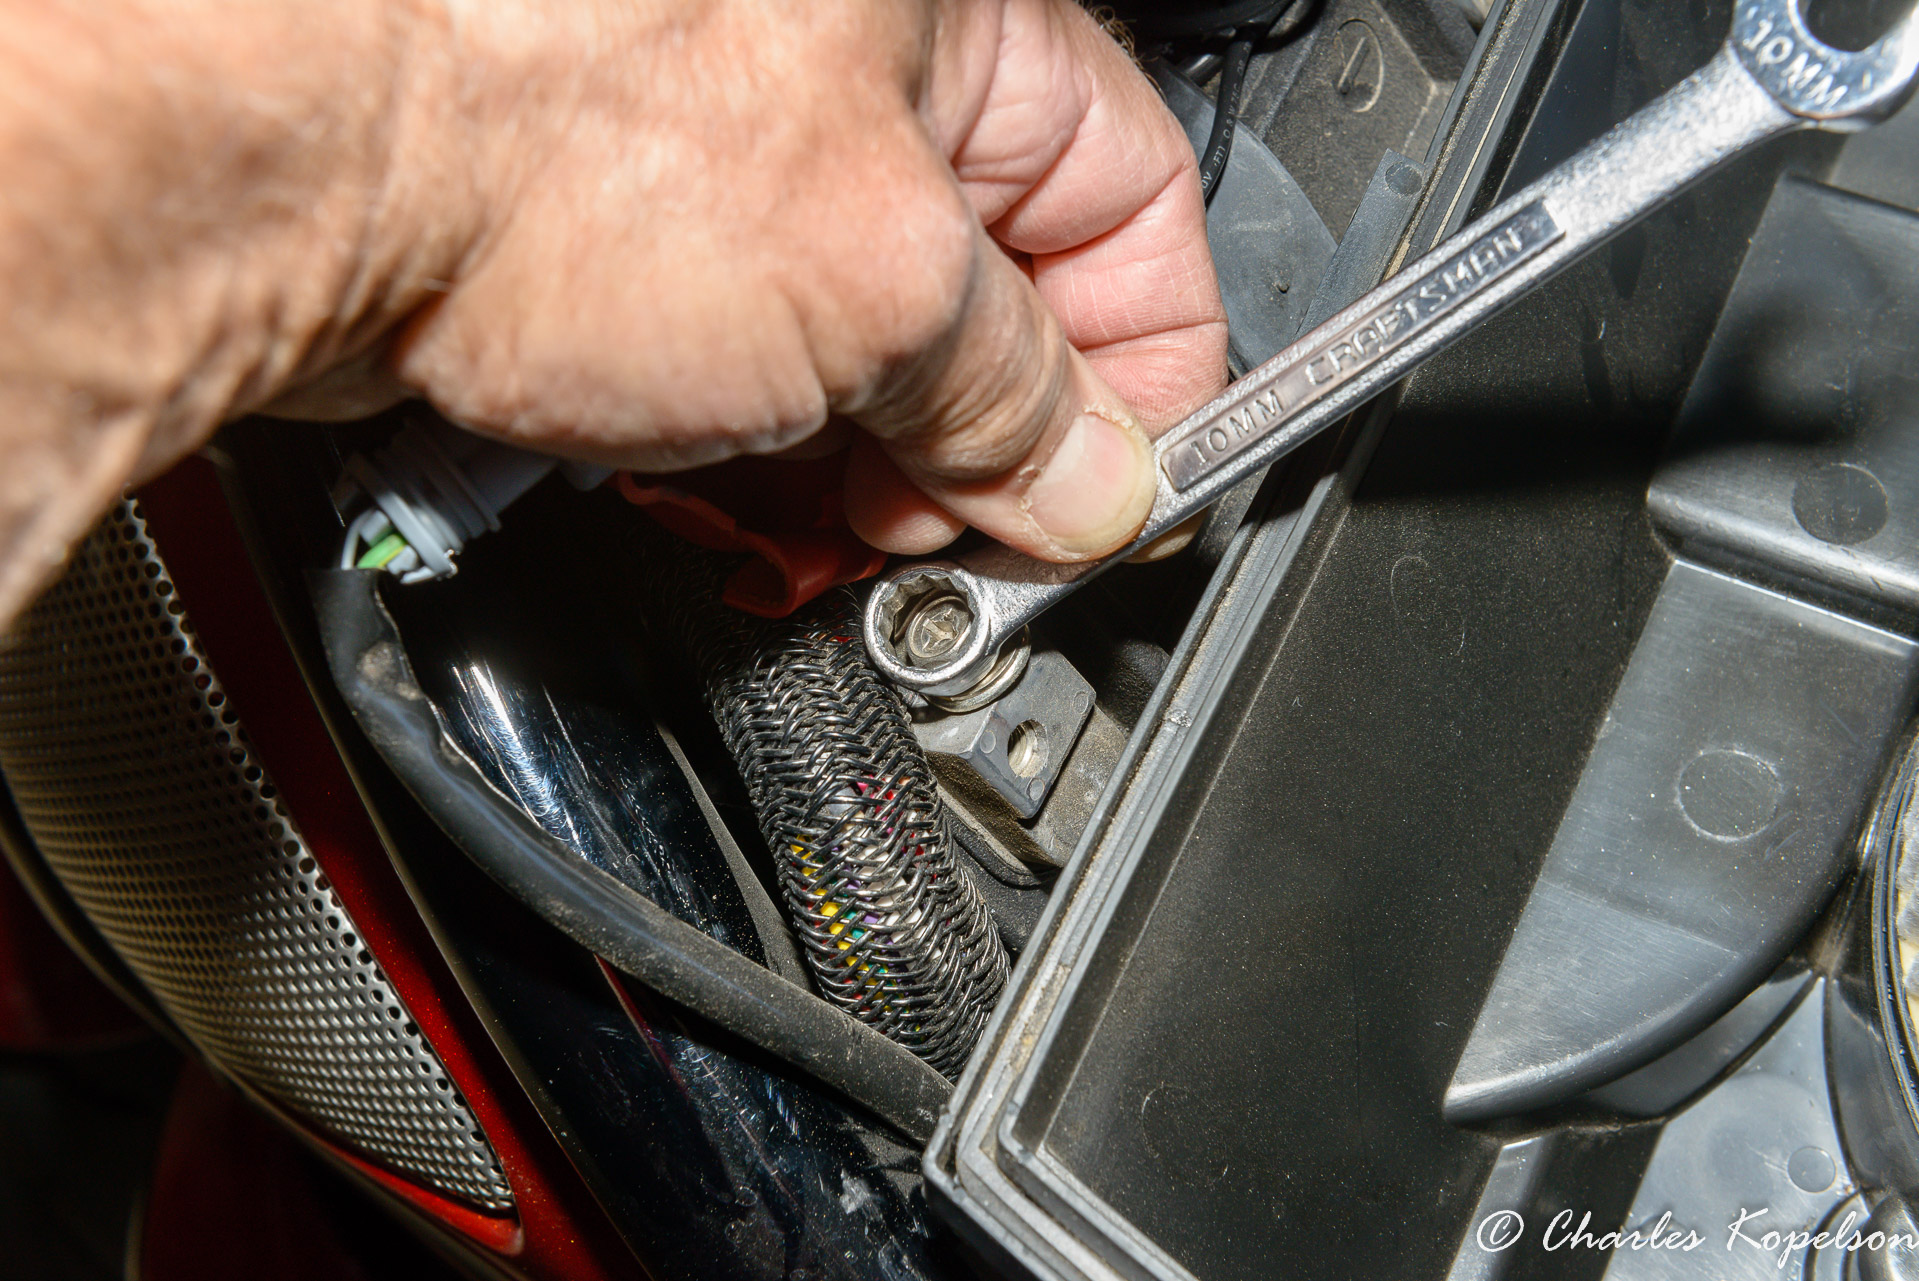 Using a 10mm wrench to loosen the battery screw. If you're doing the positive side make sure you don't touch the wrench to ground or you'll short the battery and get a spark.